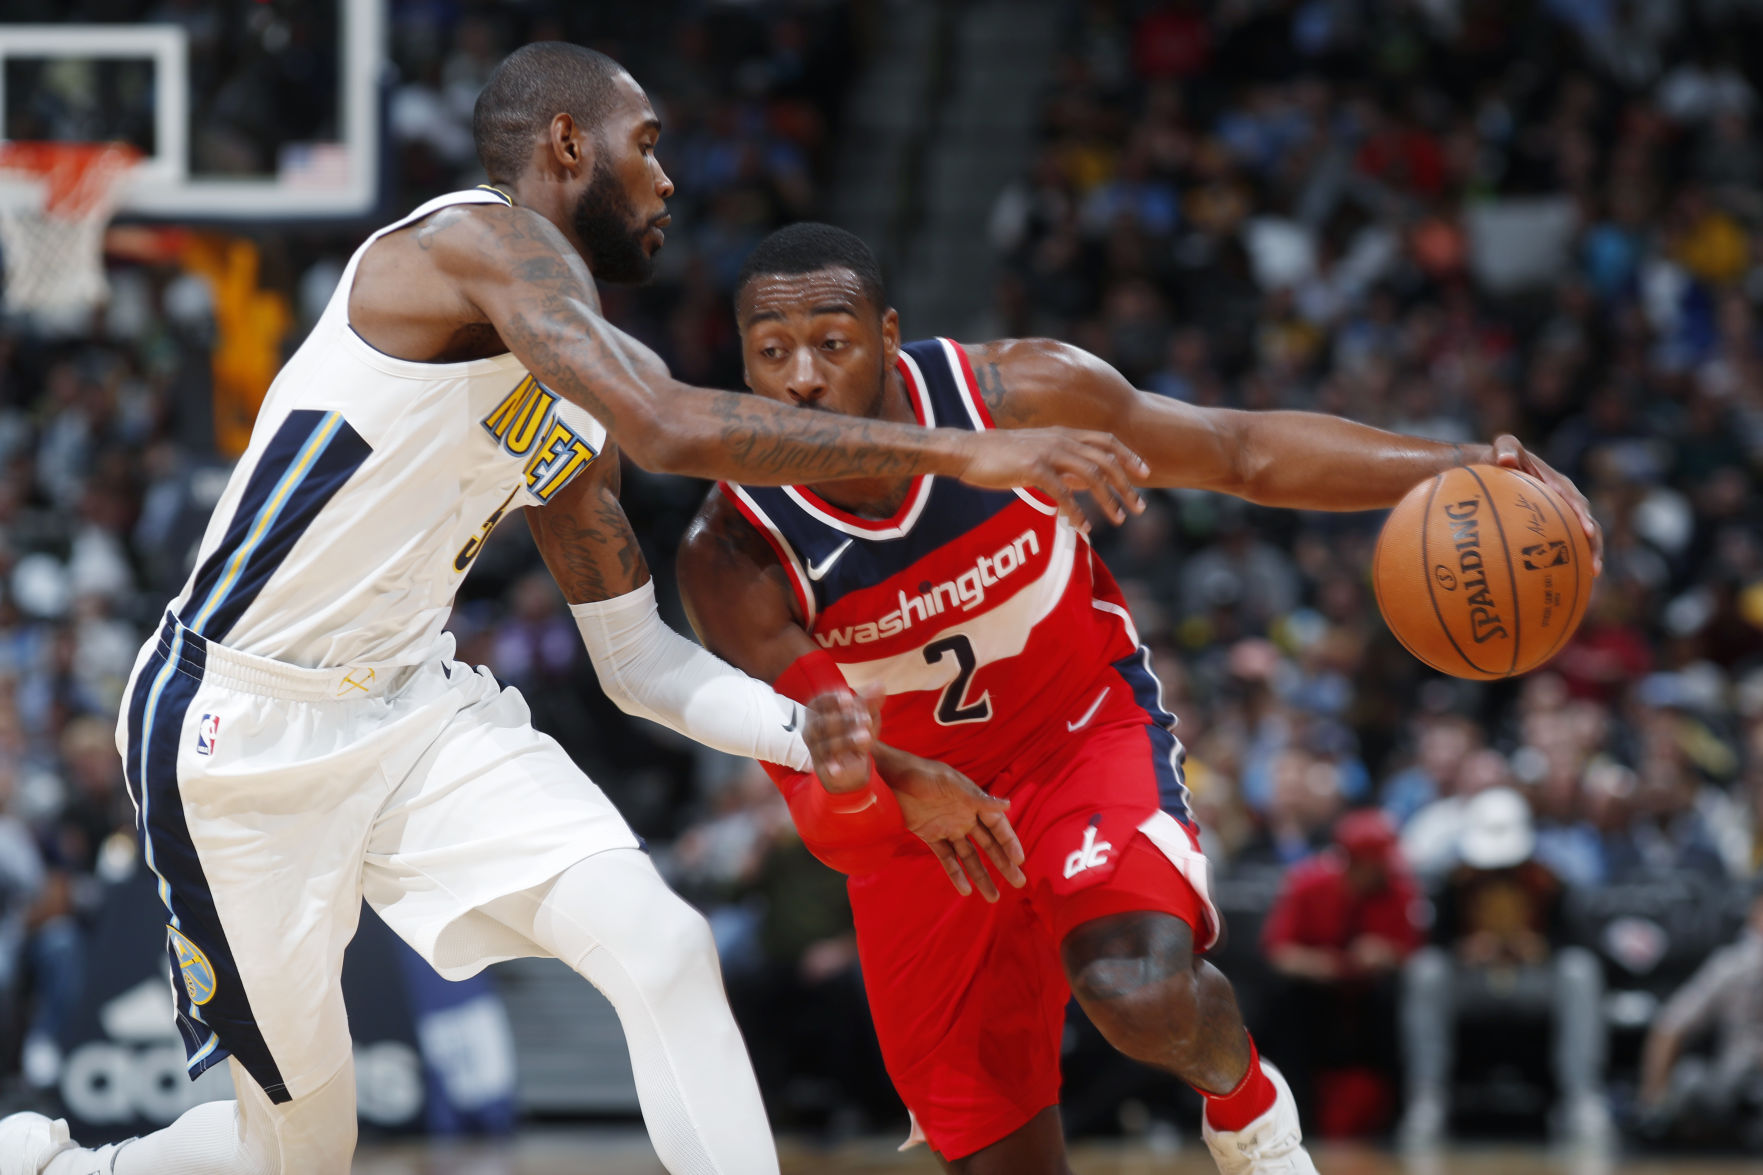 Beal scores 20 points, Wizards beat Nuggets 109-104 - The Garden Island1763 x 1175